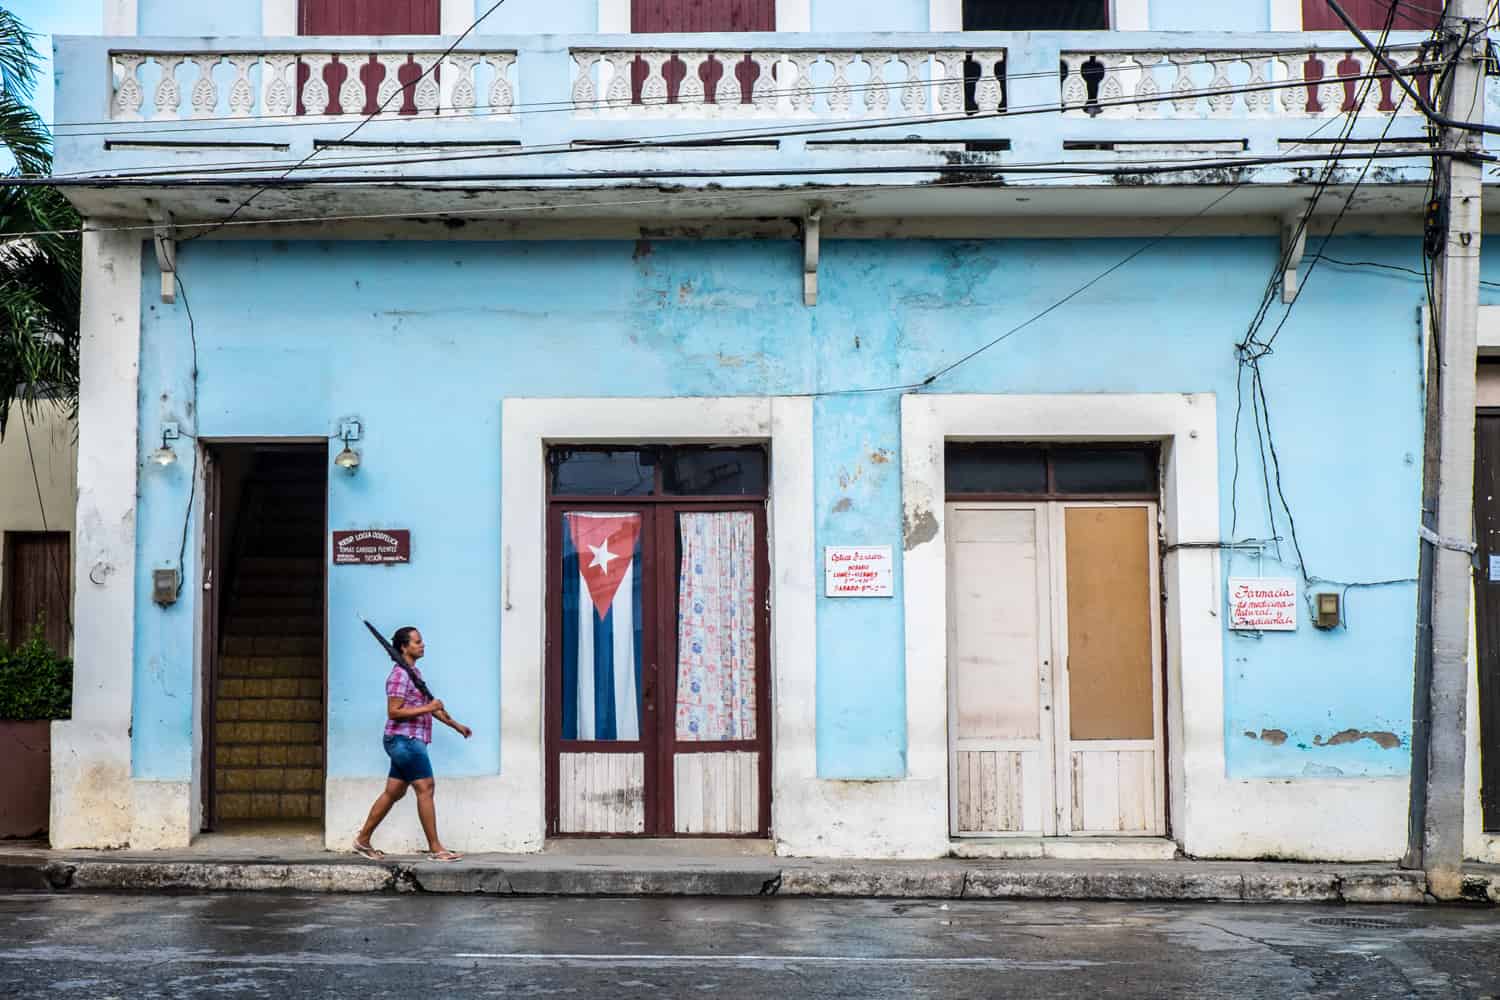 A woman holding an umbrella walked past a blue building with a Cuba flag hanging in the window. 